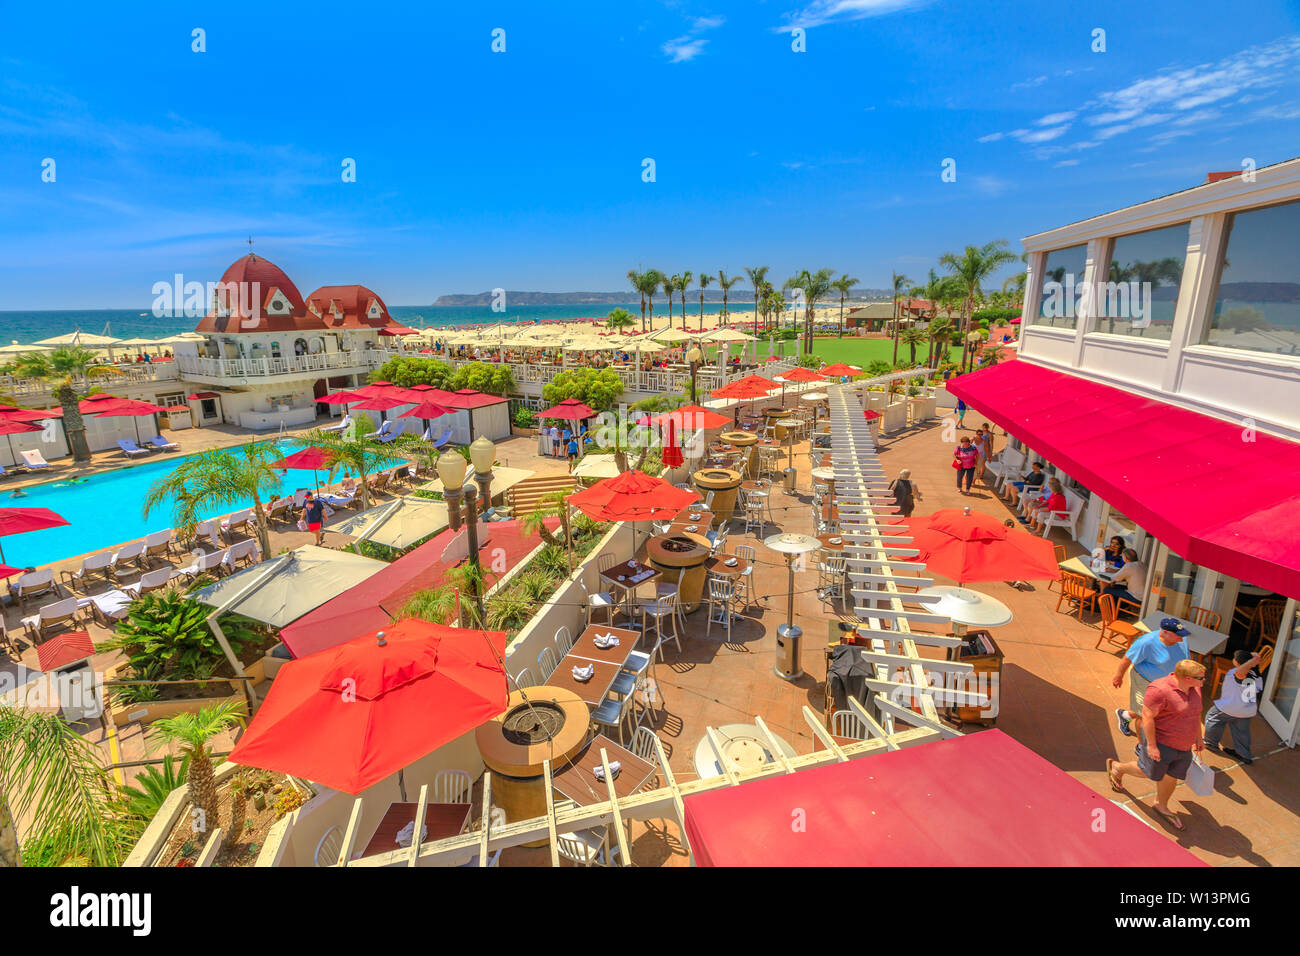 San Diego, California, United States - August 1, 2018: aerial view of Pacific Ocean in West Coast above historic Coronado Hotel, beach resort location Stock Photo